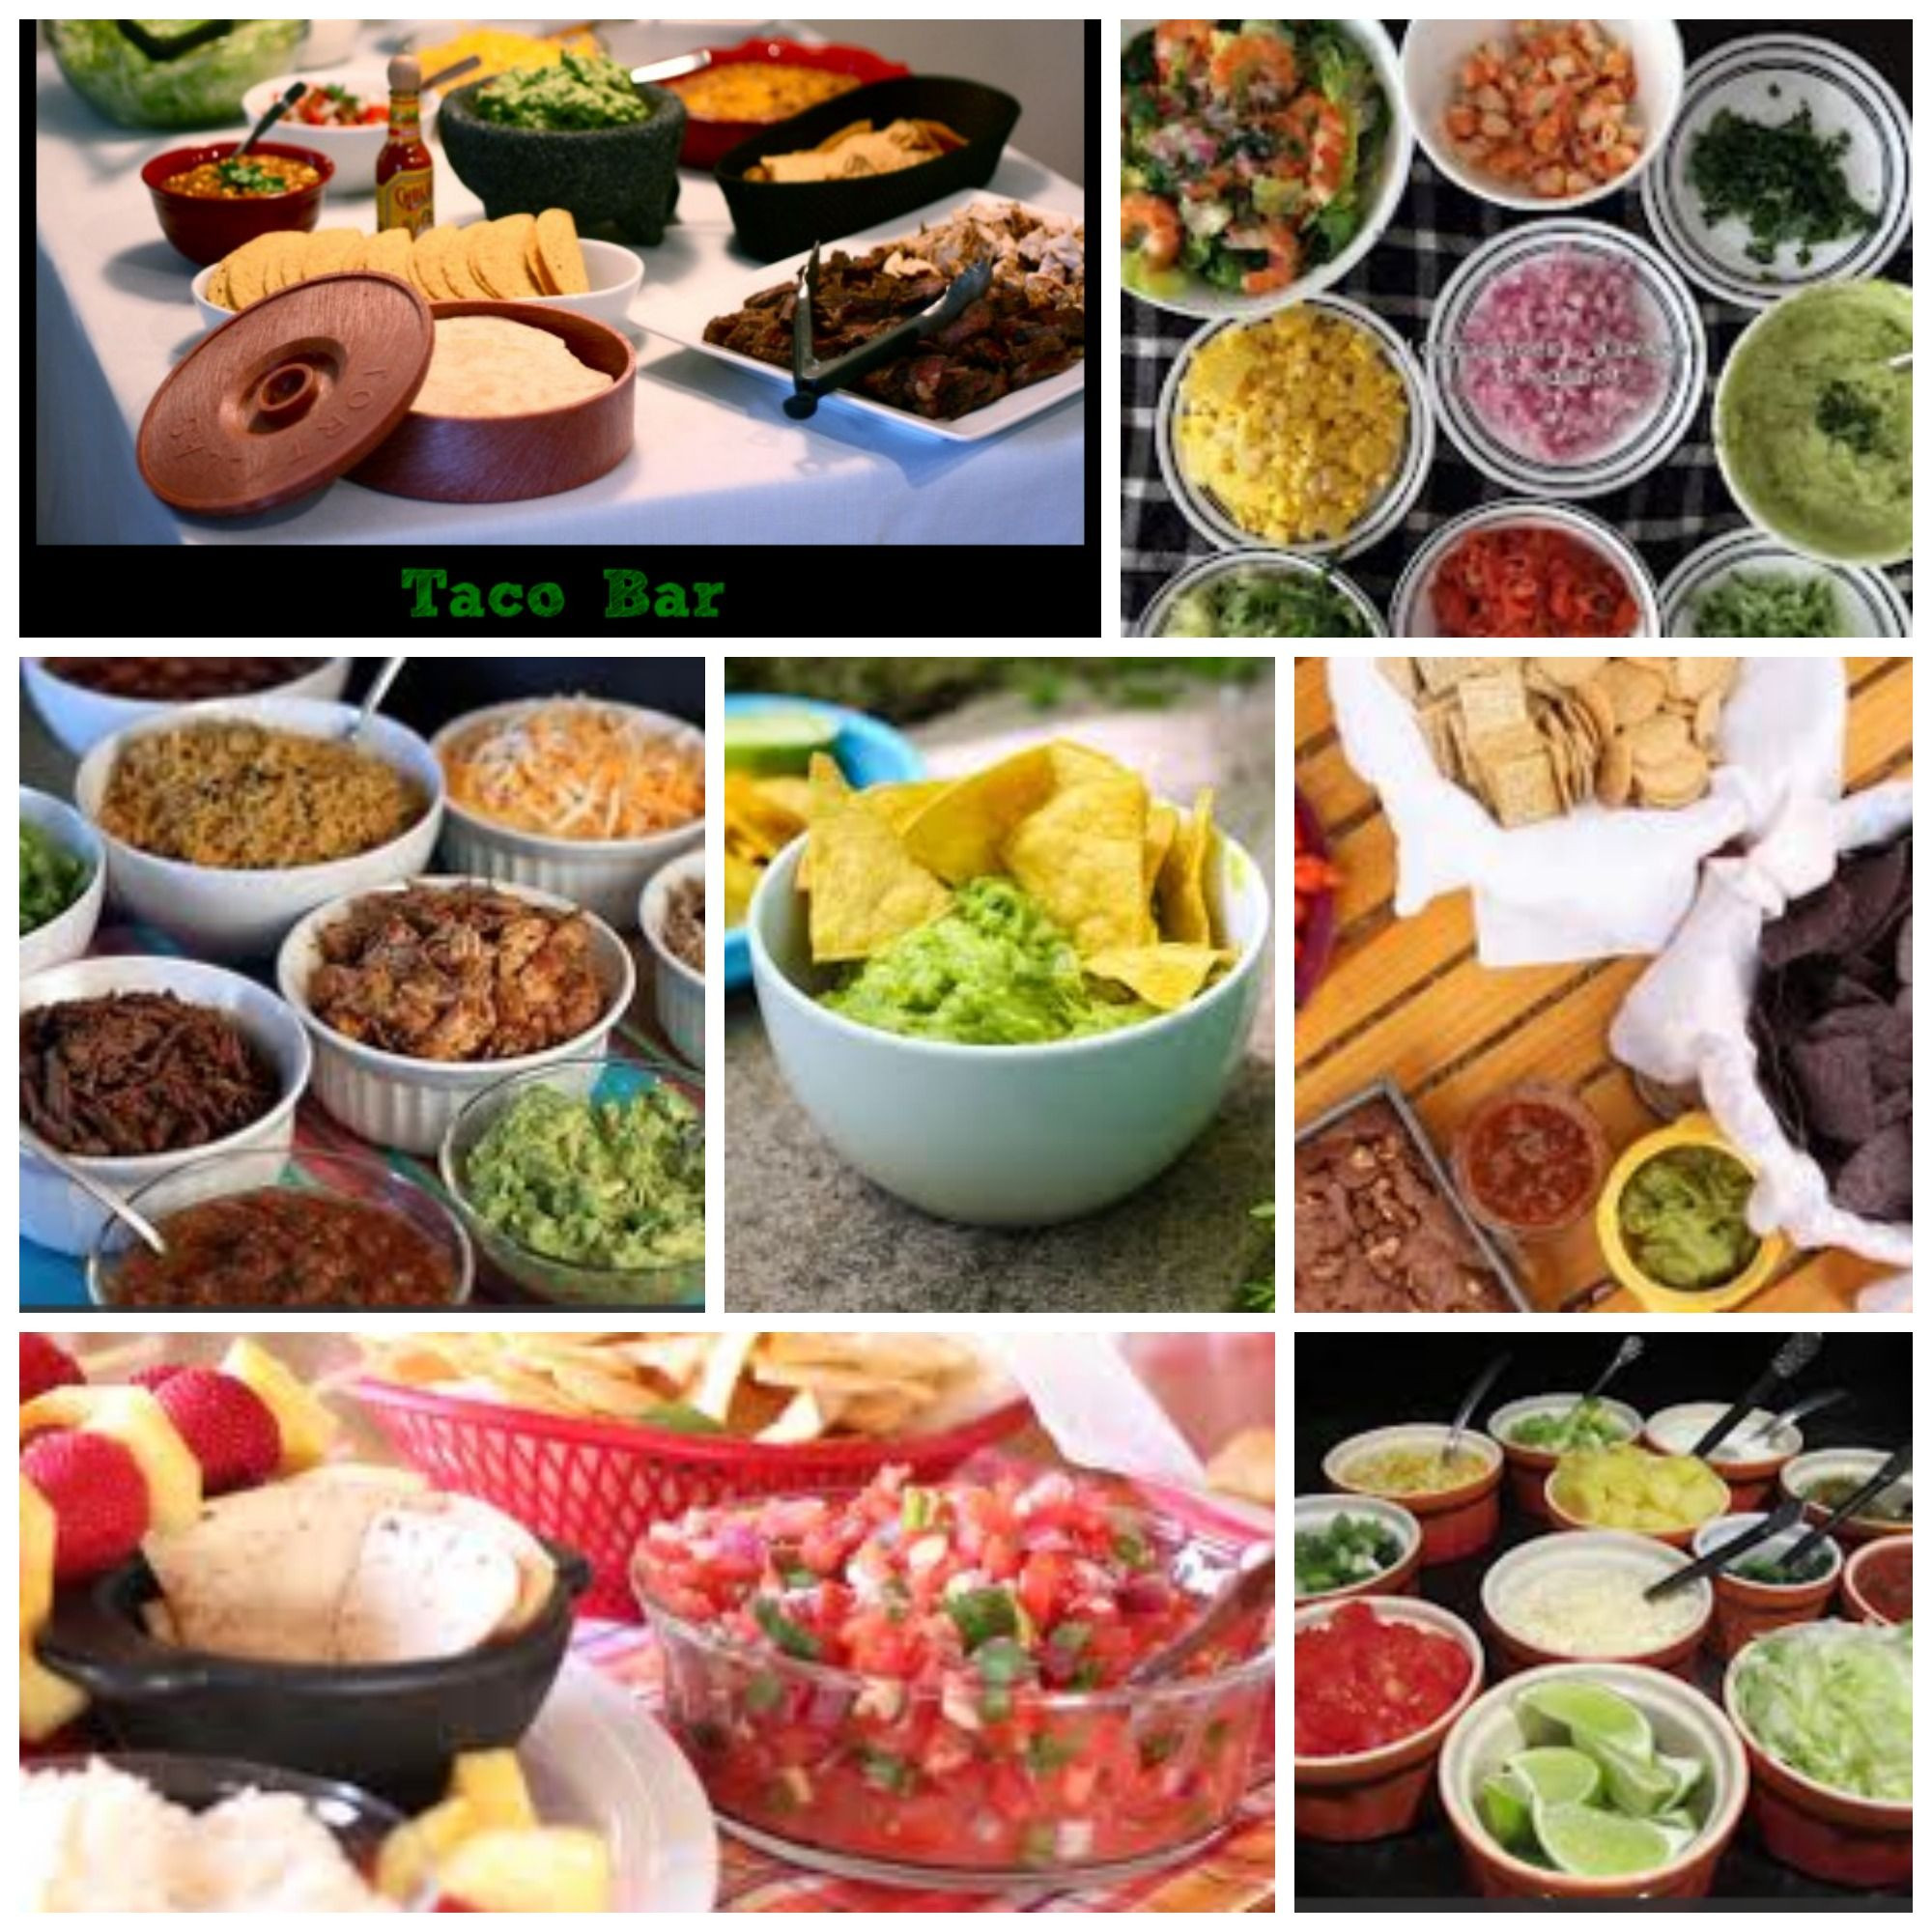 Christmas Party Menu Ideas For Large Groups
 Taco bar ideas to feed groups of 10